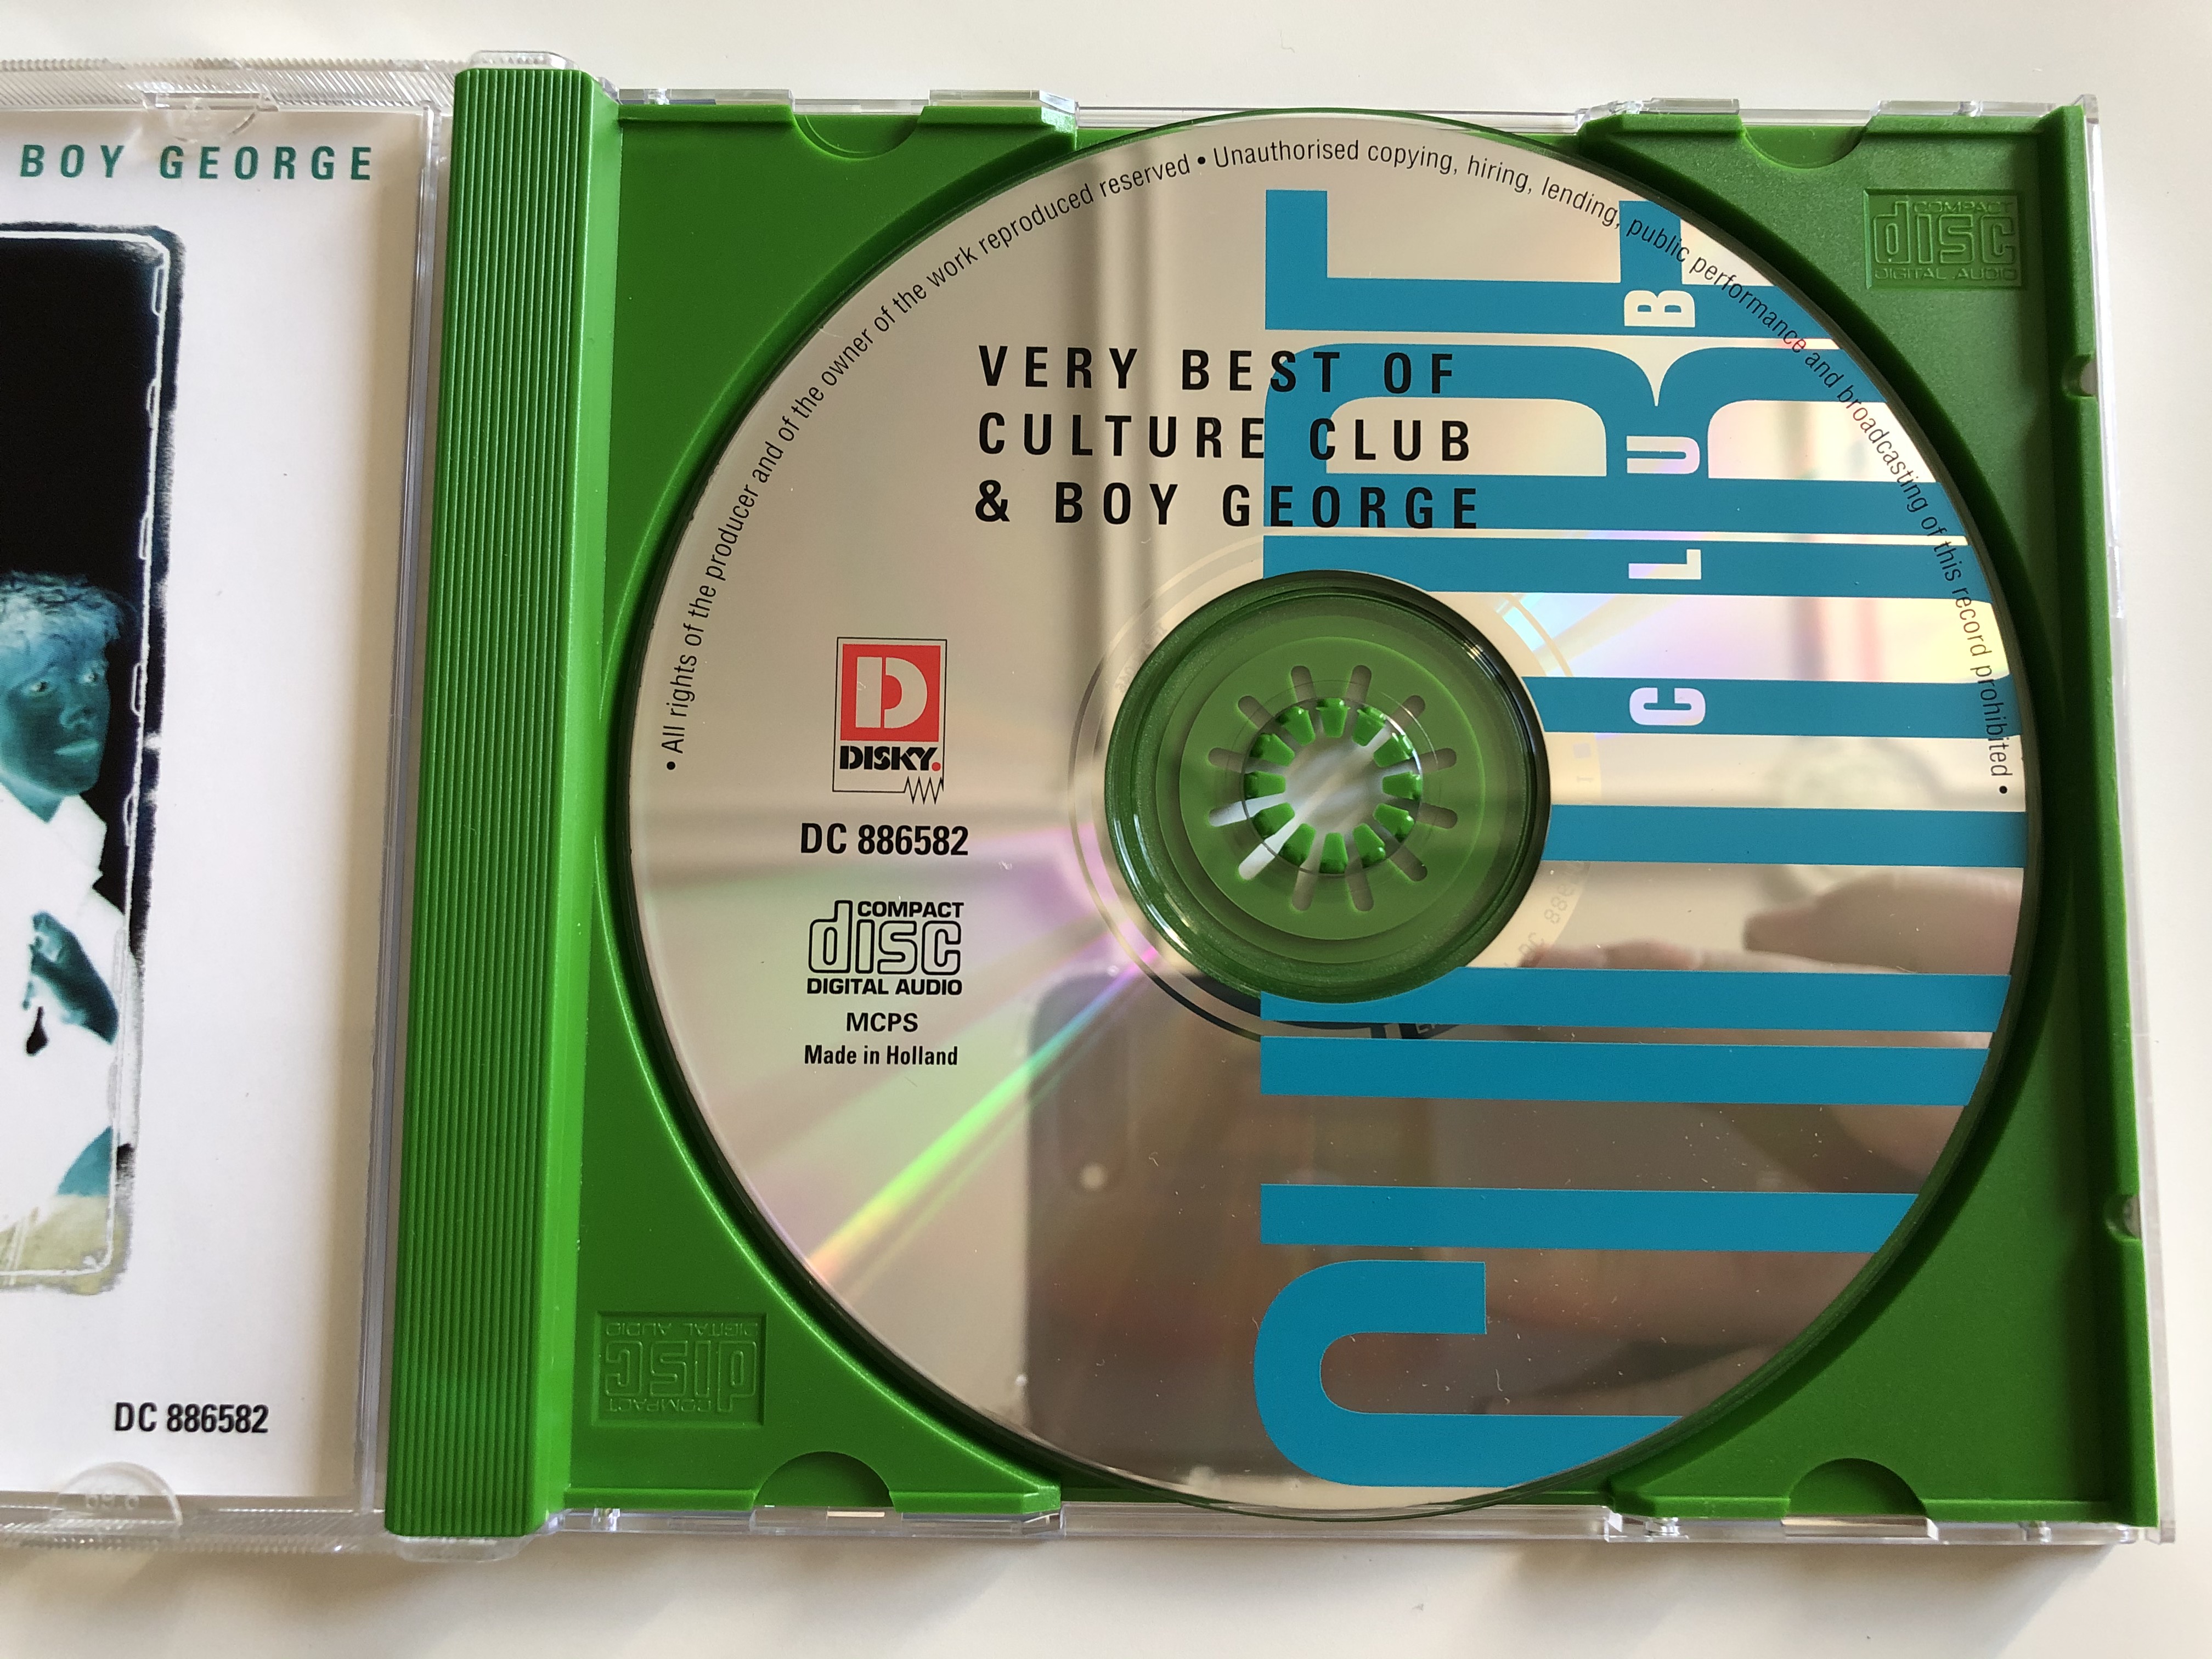 very-best-of-culture-club-boy-george-culture-club-do-you-really-want-to-hurt-me-the-war-song-everything-i-own-karma-chameleon-and-more-disky-audio-cd-1997-dc-886582-4-.jpg